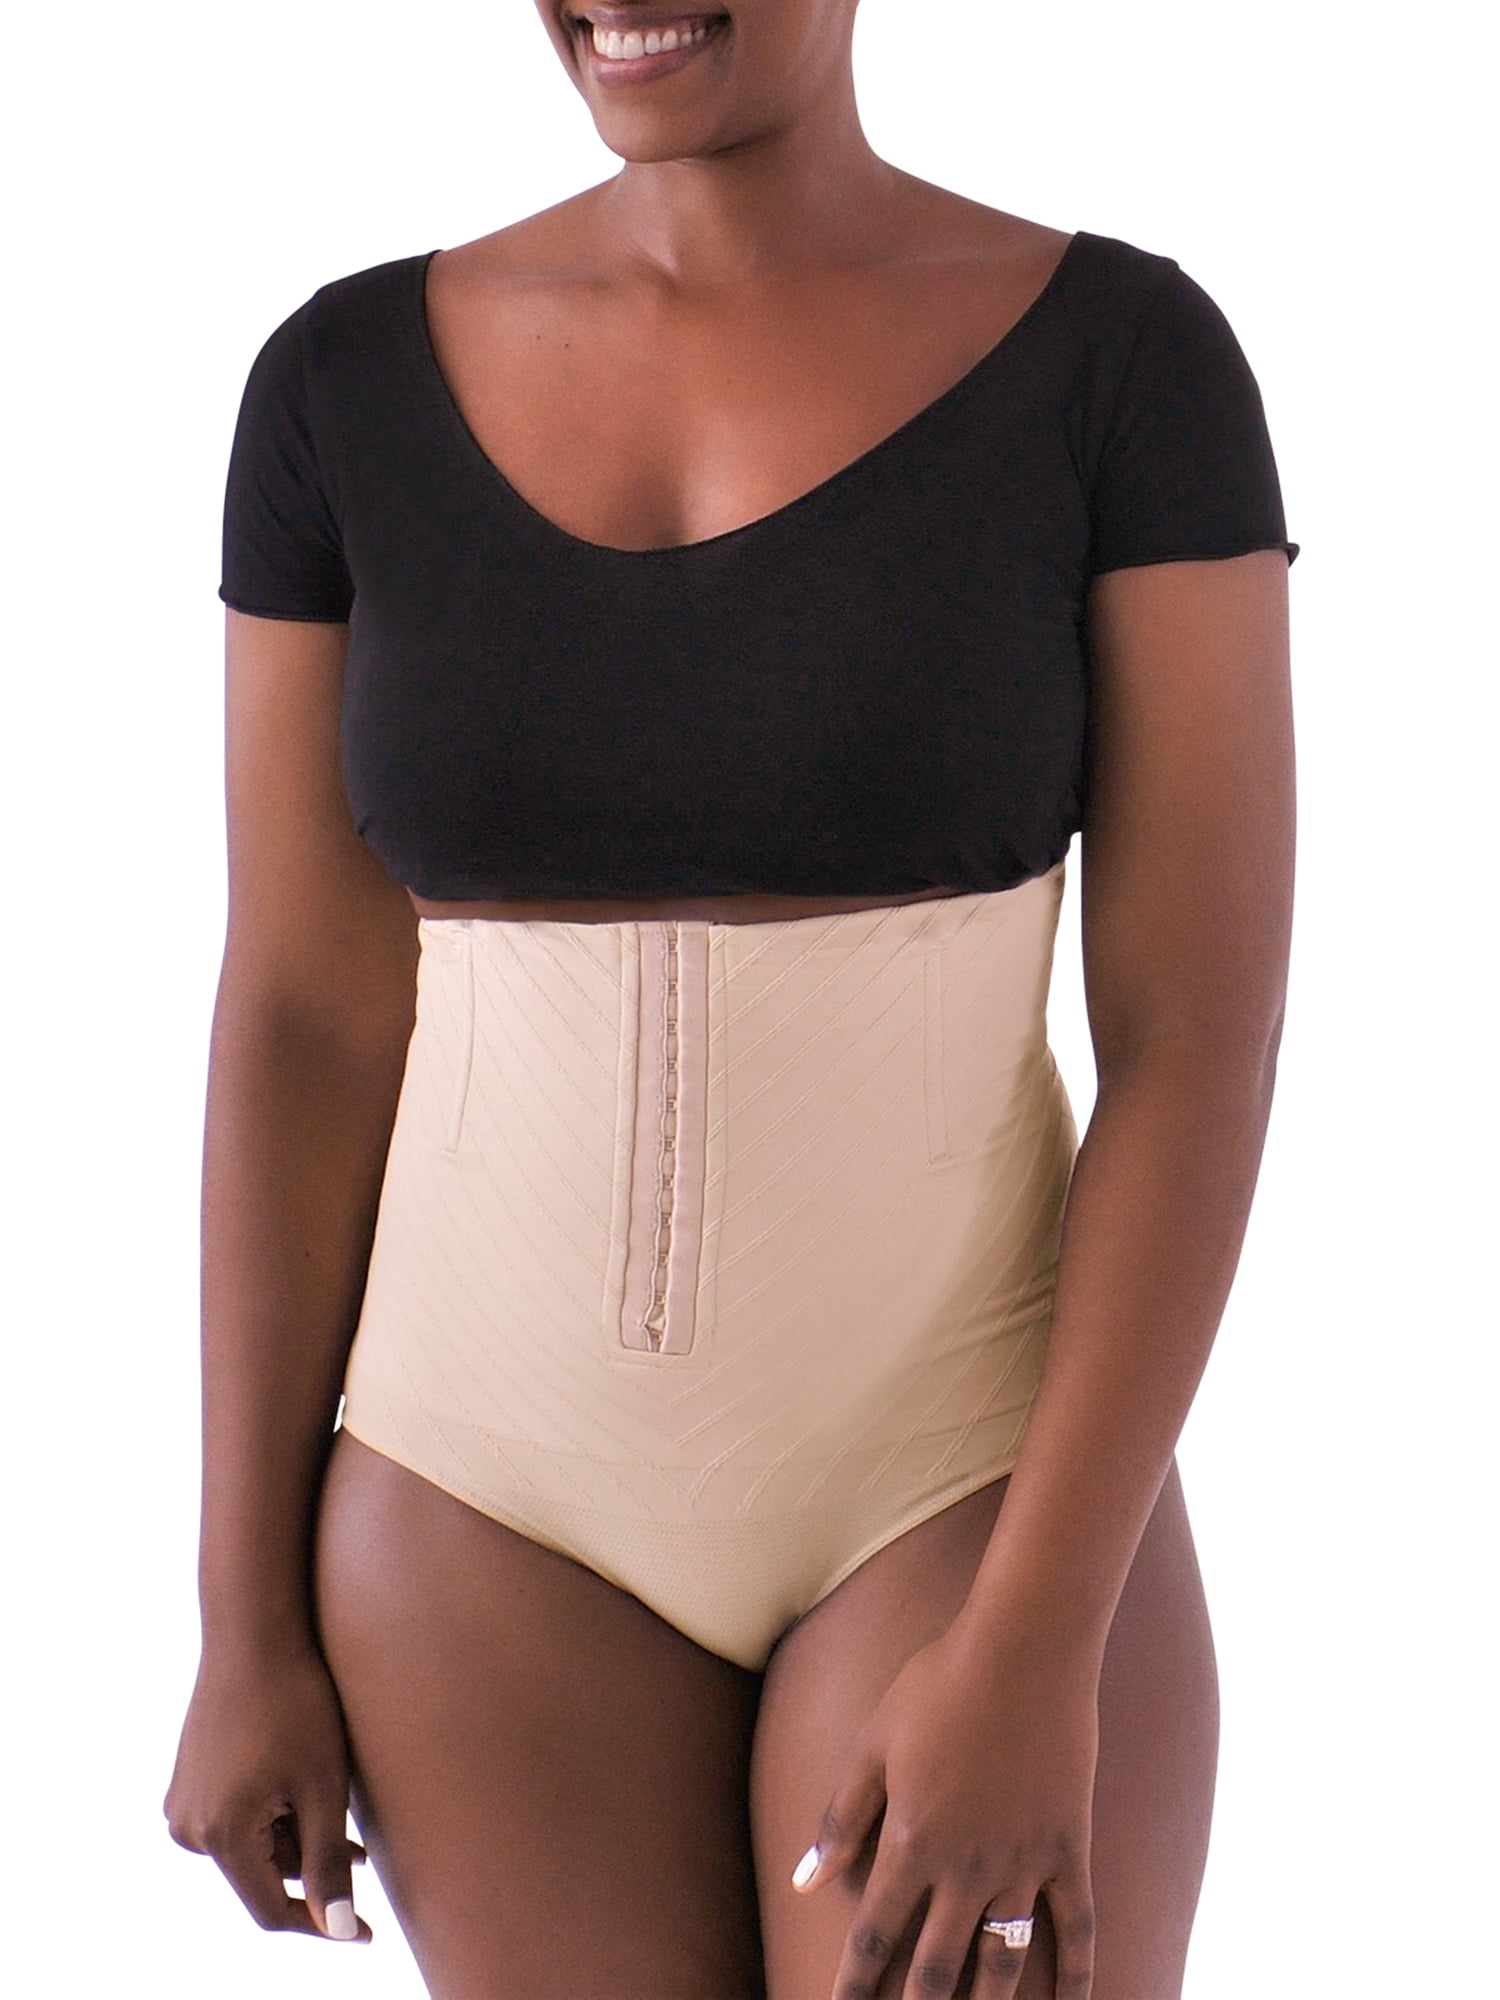 Belly Bandit Womens C-Section Recovery Maternity Firm Control